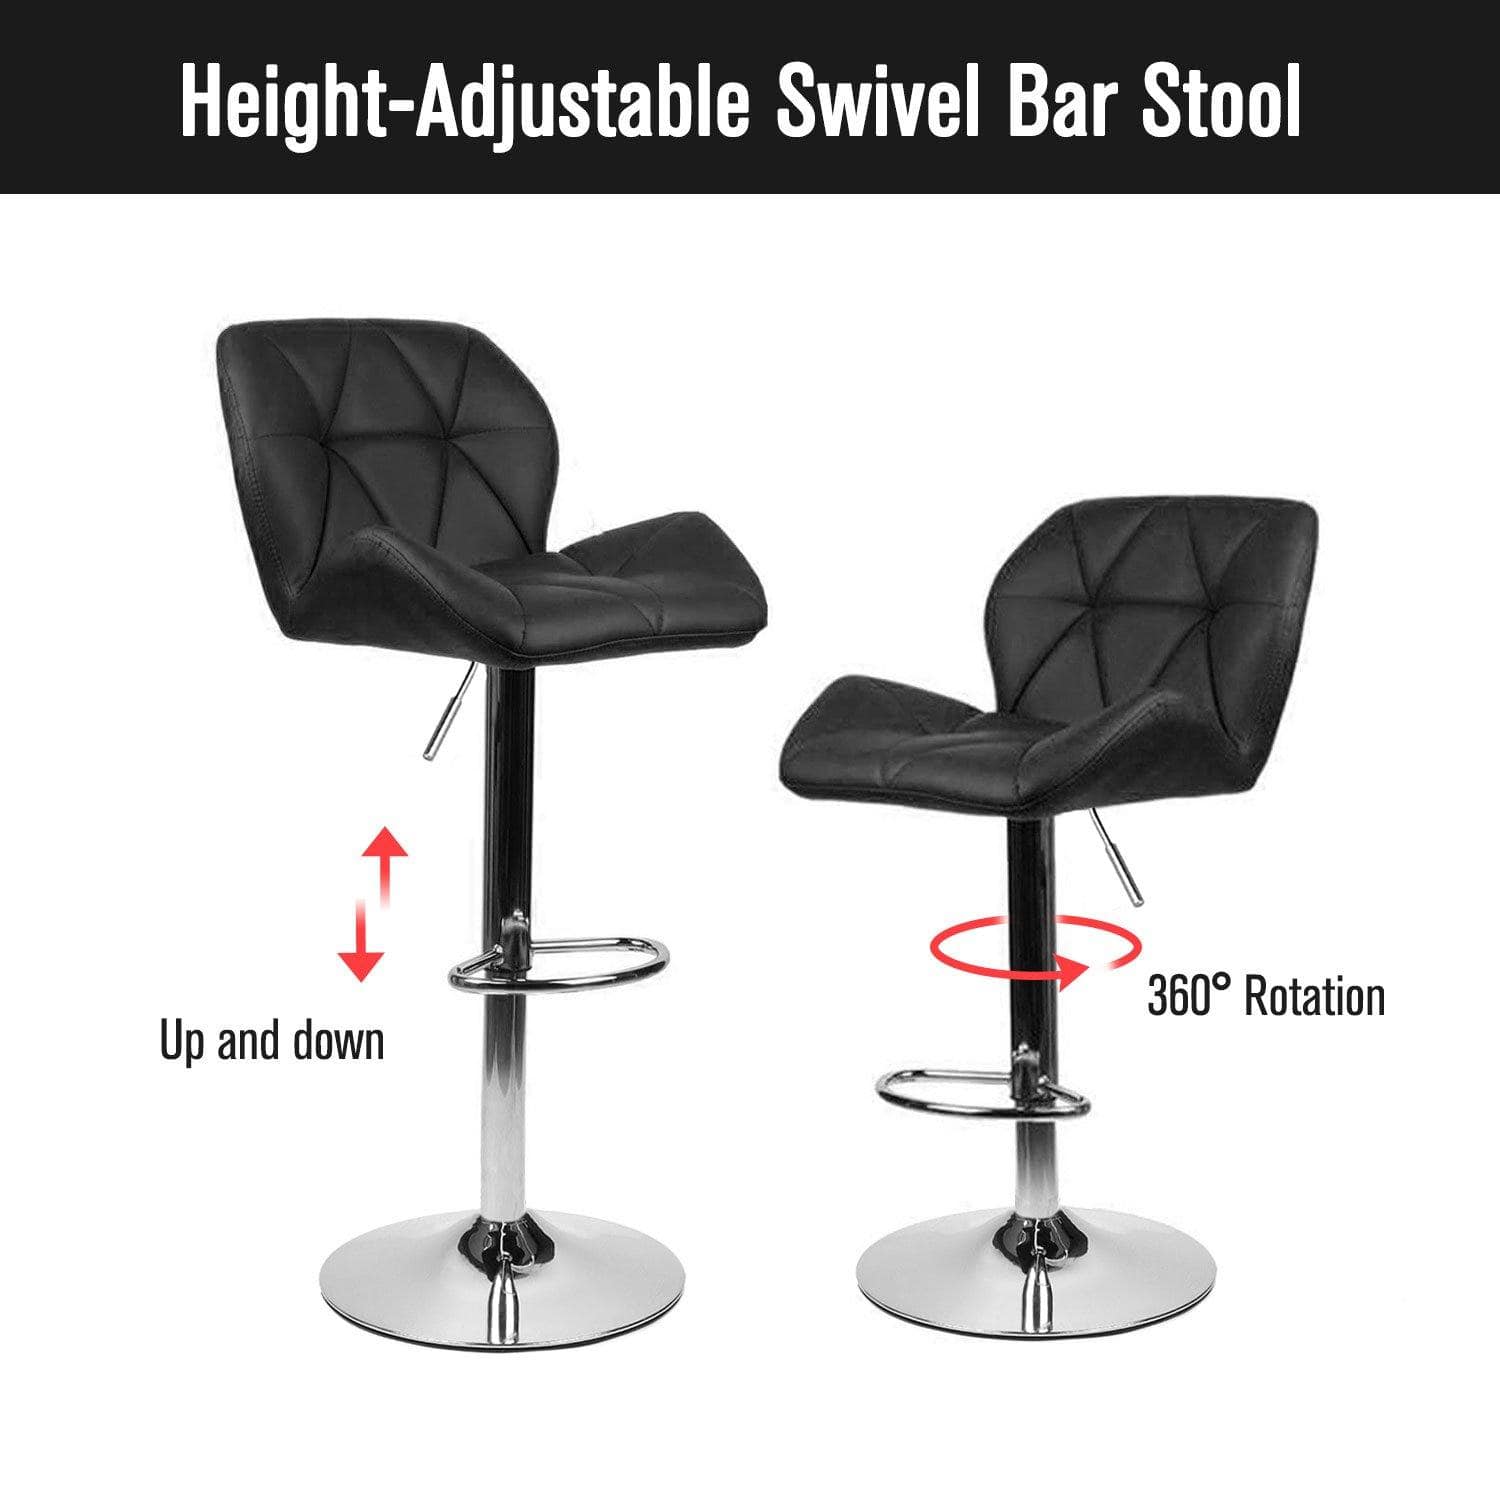 Elecwish Barstools(Set of 2) can up and down and has 360° rotation